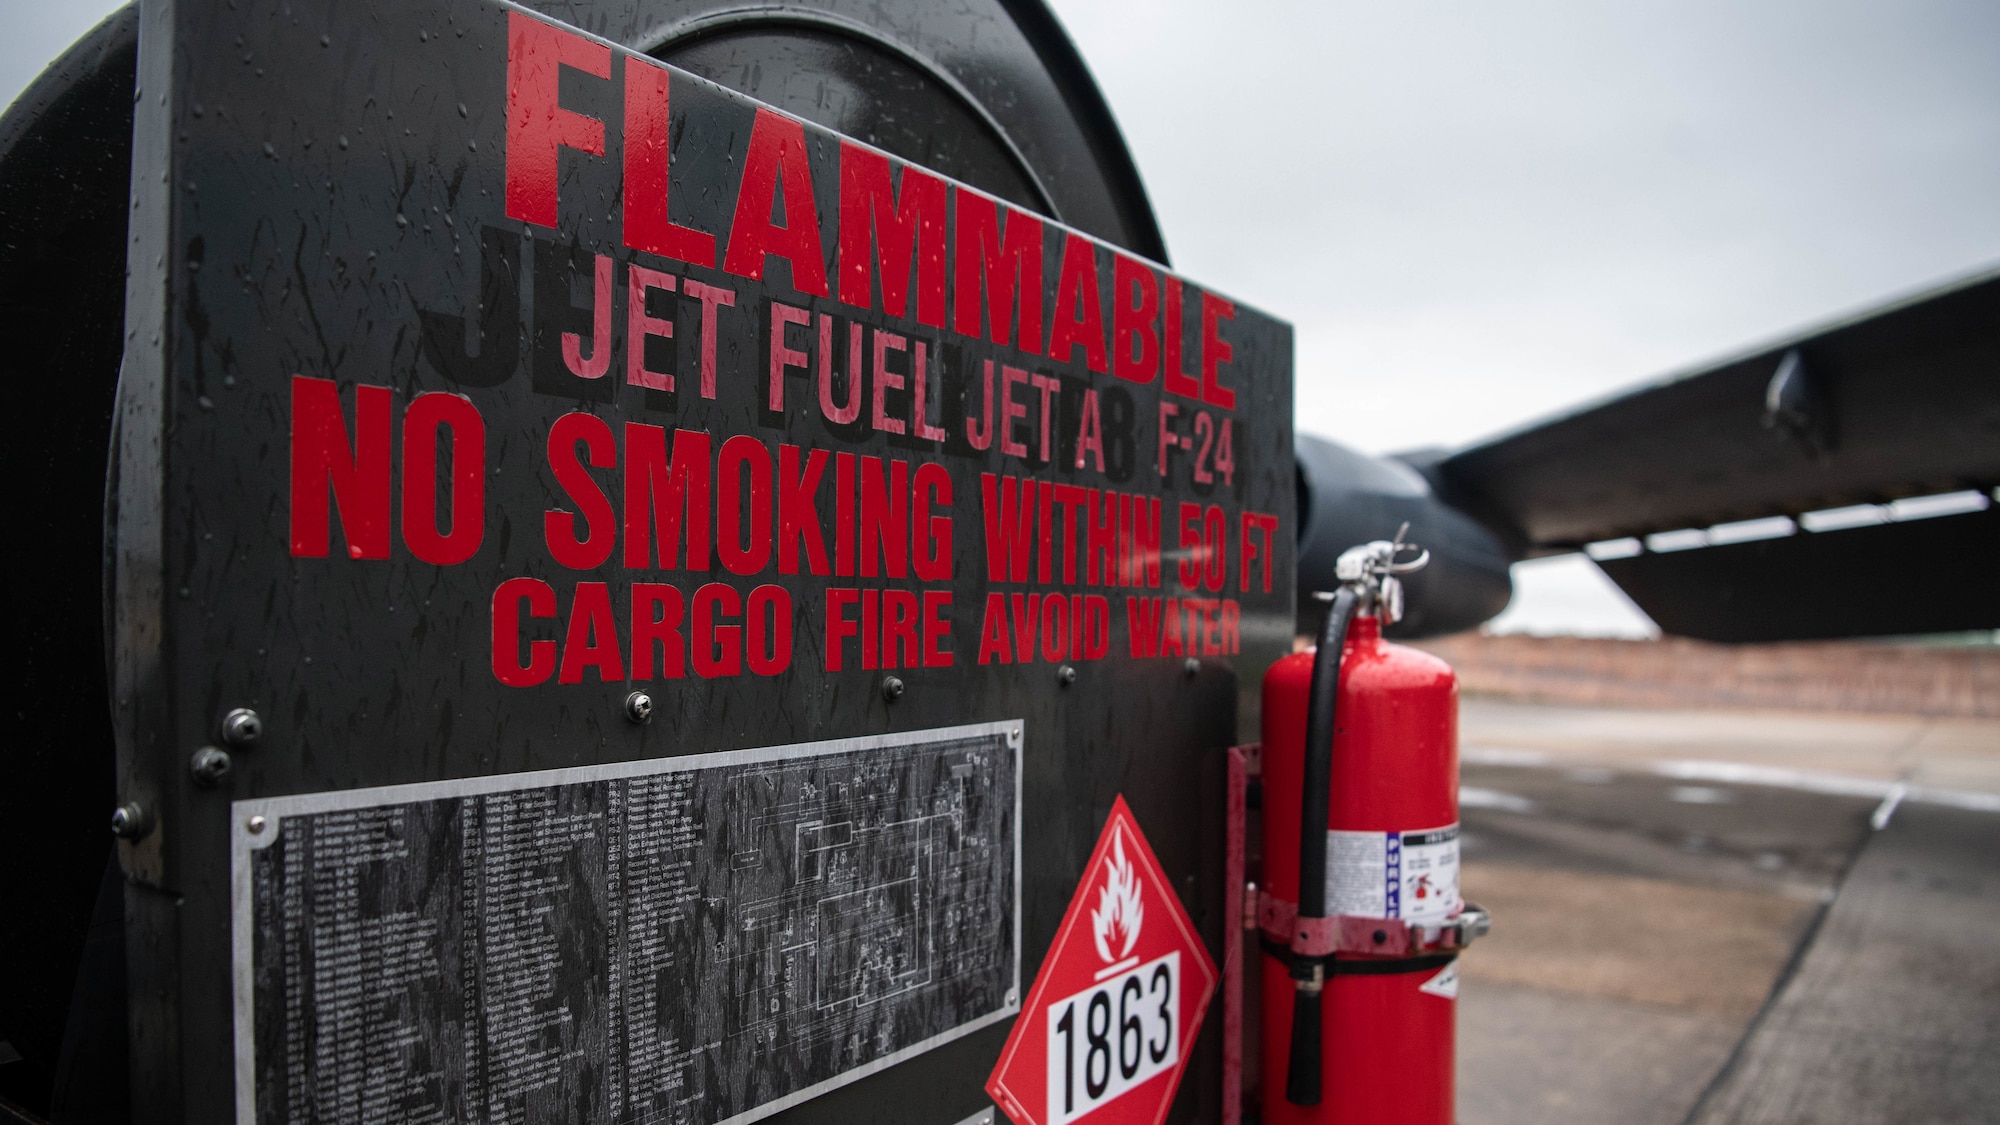 Planes don’t fly without fuel